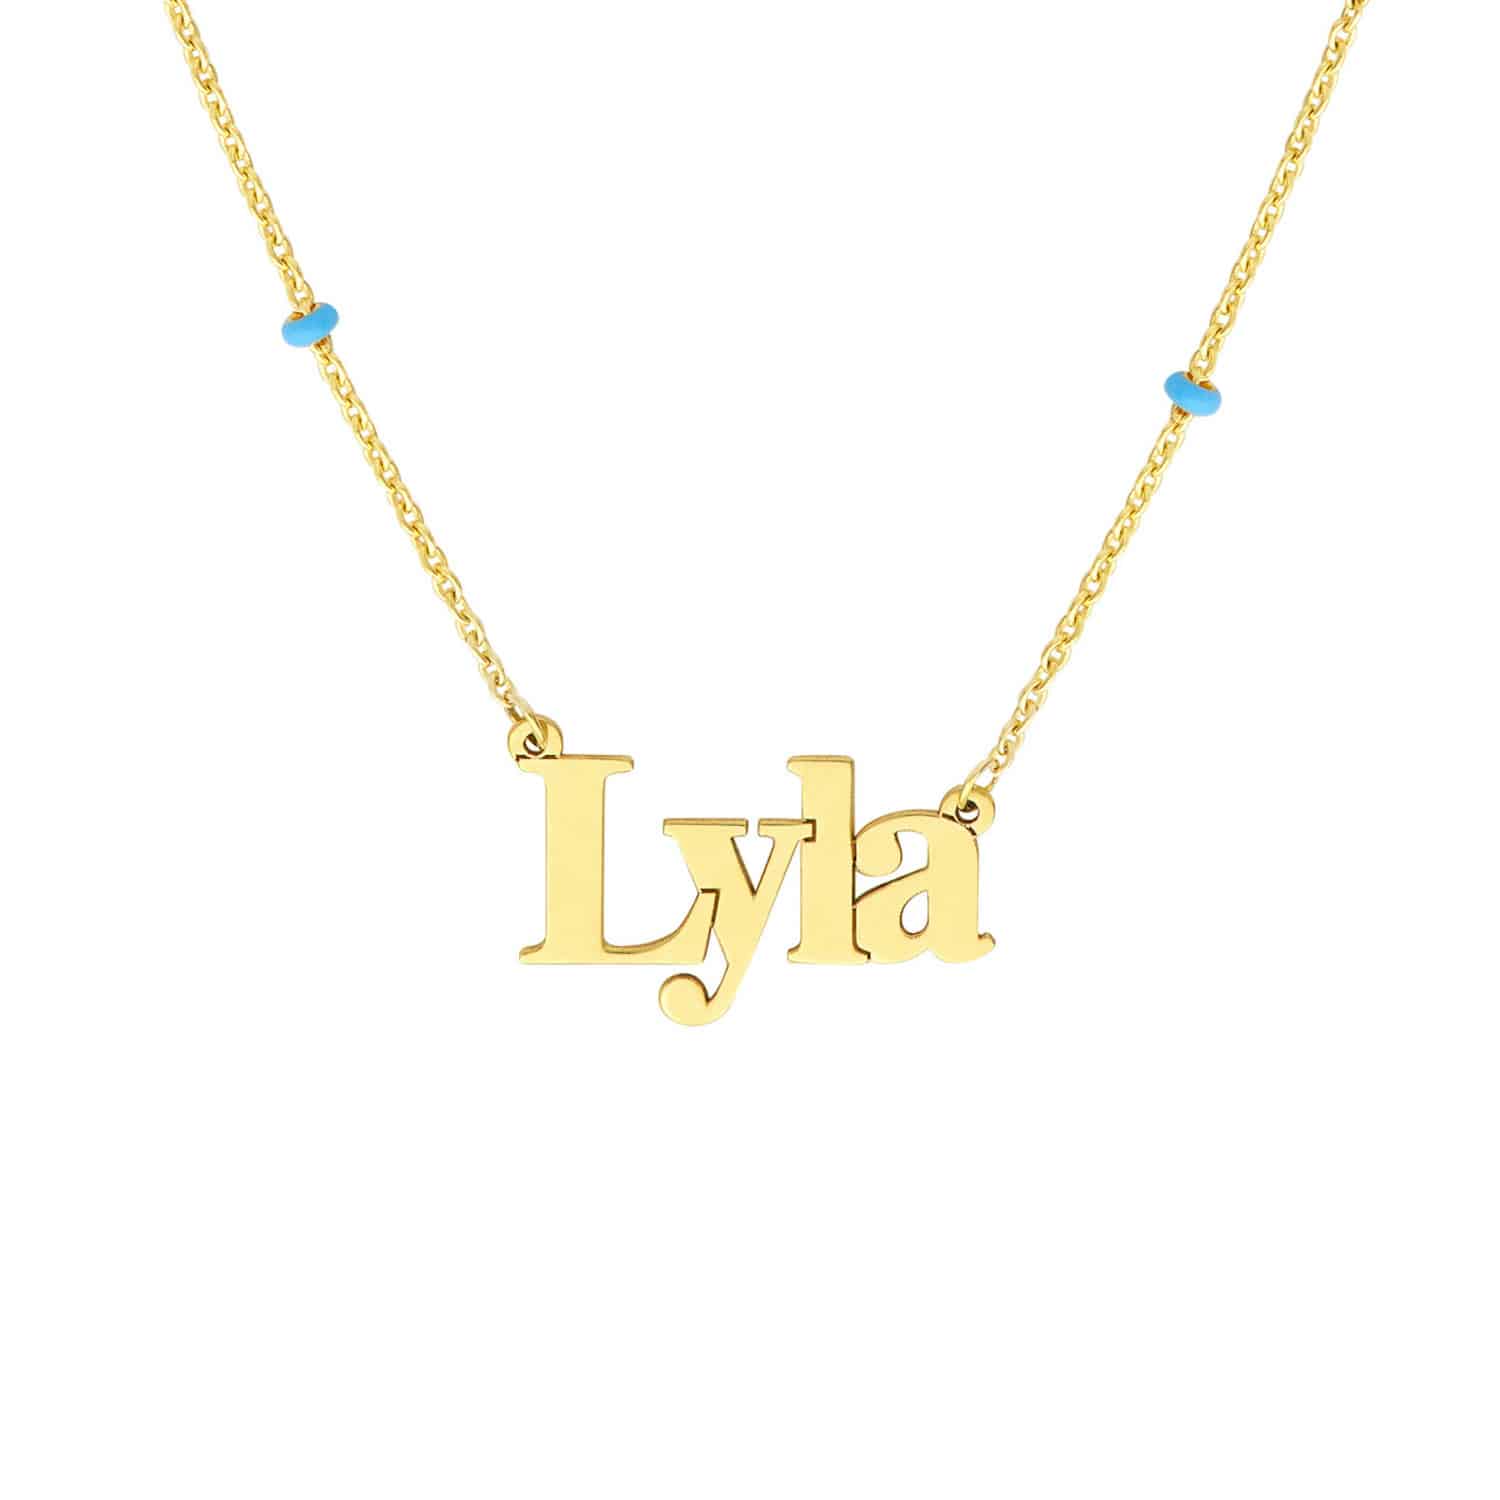 Personalized 14K Yellow Gold Turquoise Station Beads Nameplate Pendant Necklace